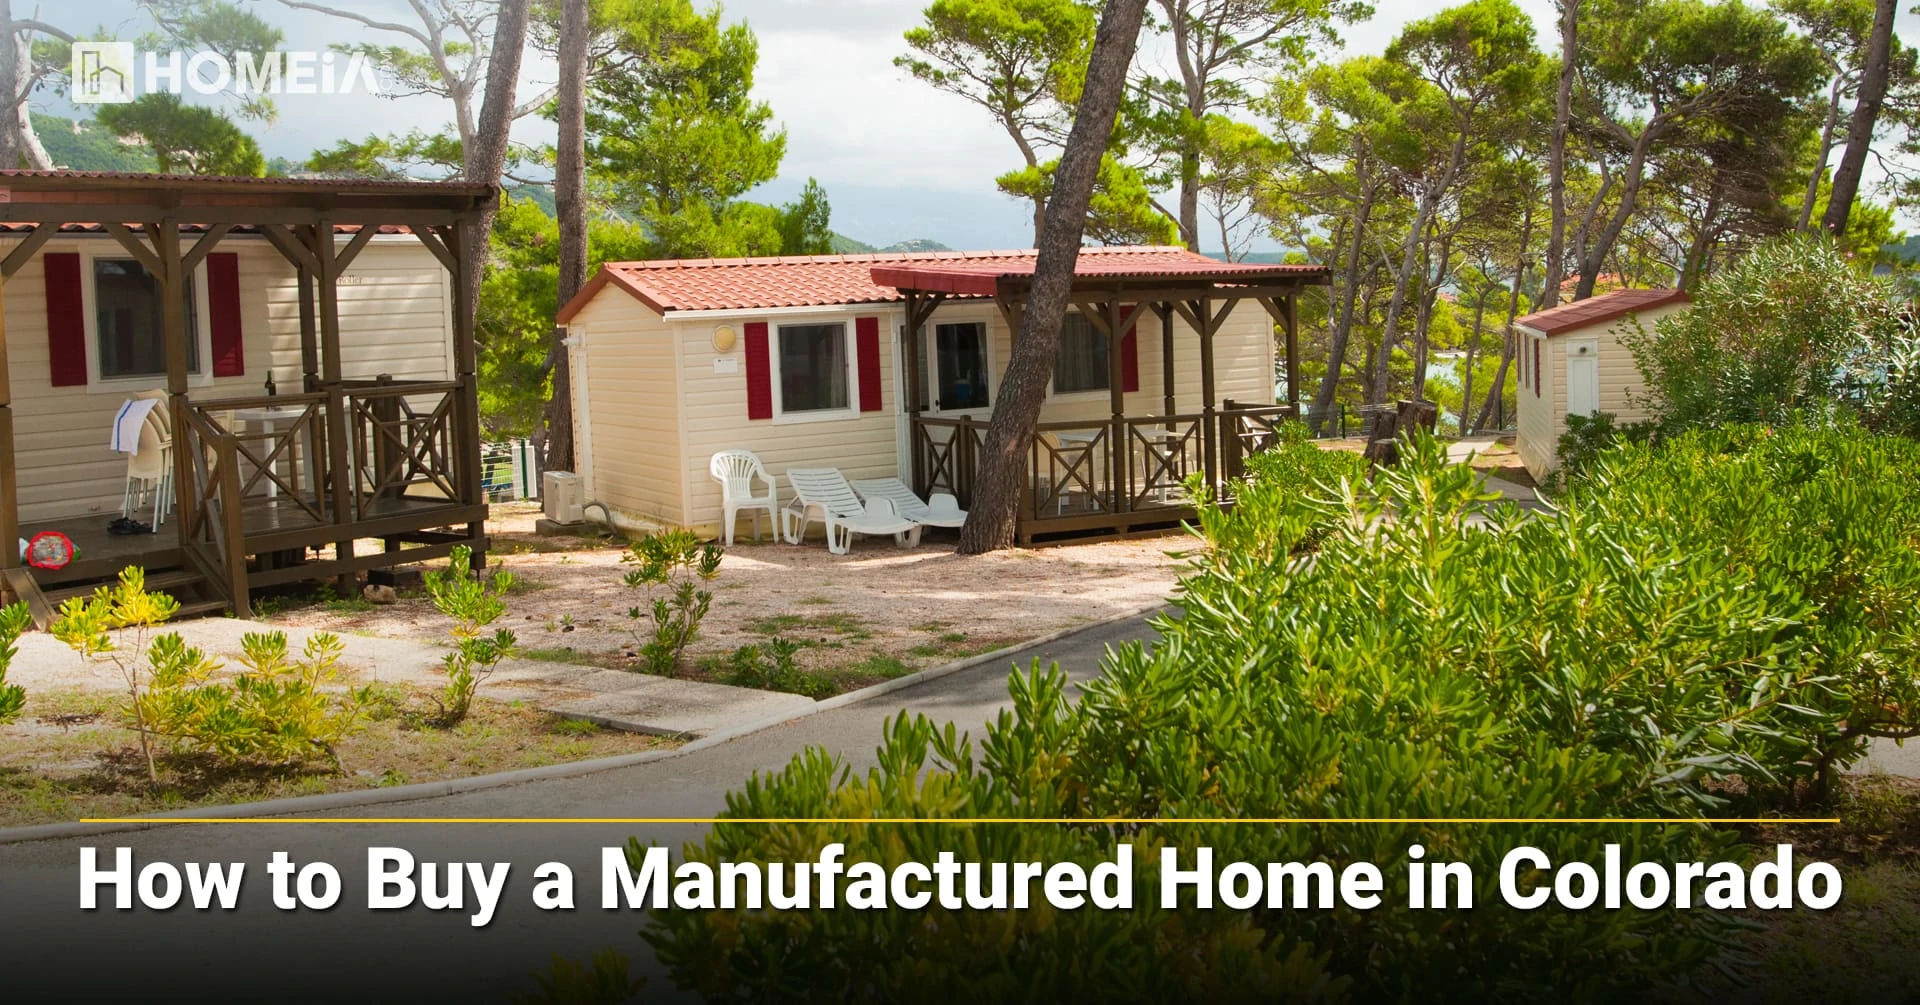 How to Buy Mobile Home in Colorado